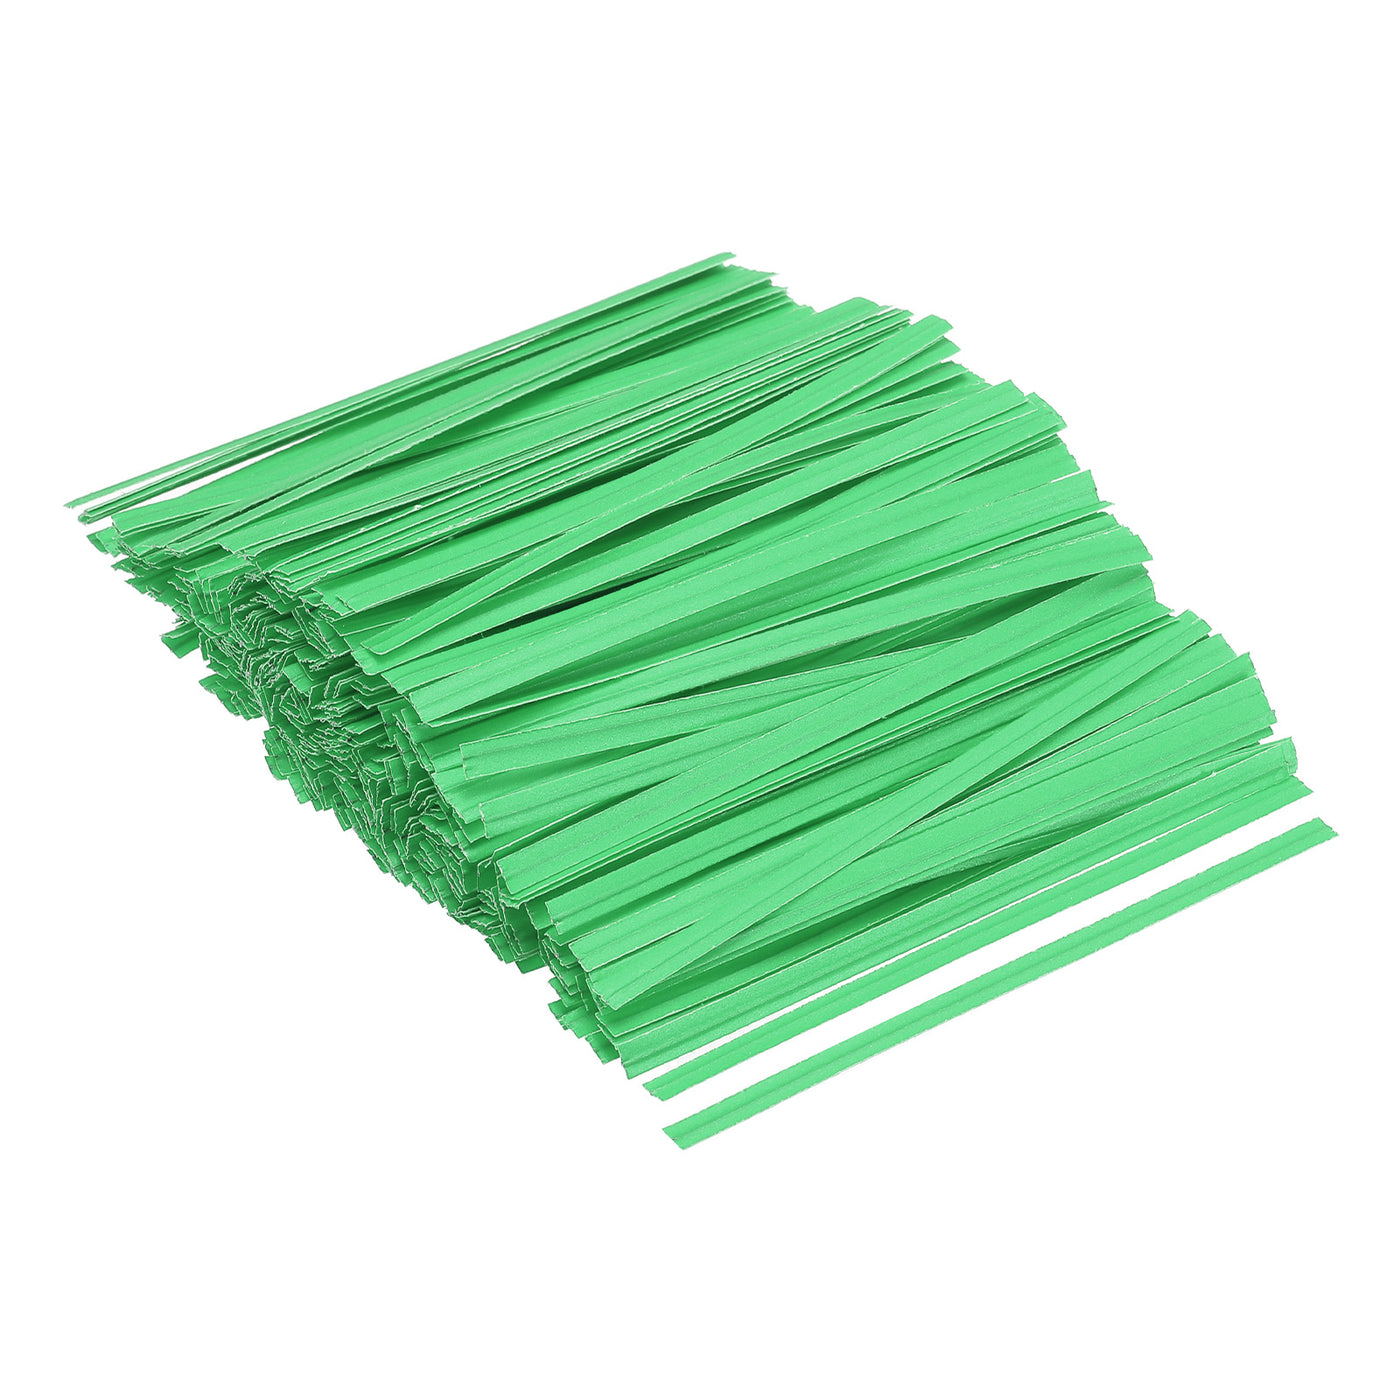 Harfington Twist Ties 3.5" Paper Closure Tie for Party Bags, Candy, Crafts Green 500pcs